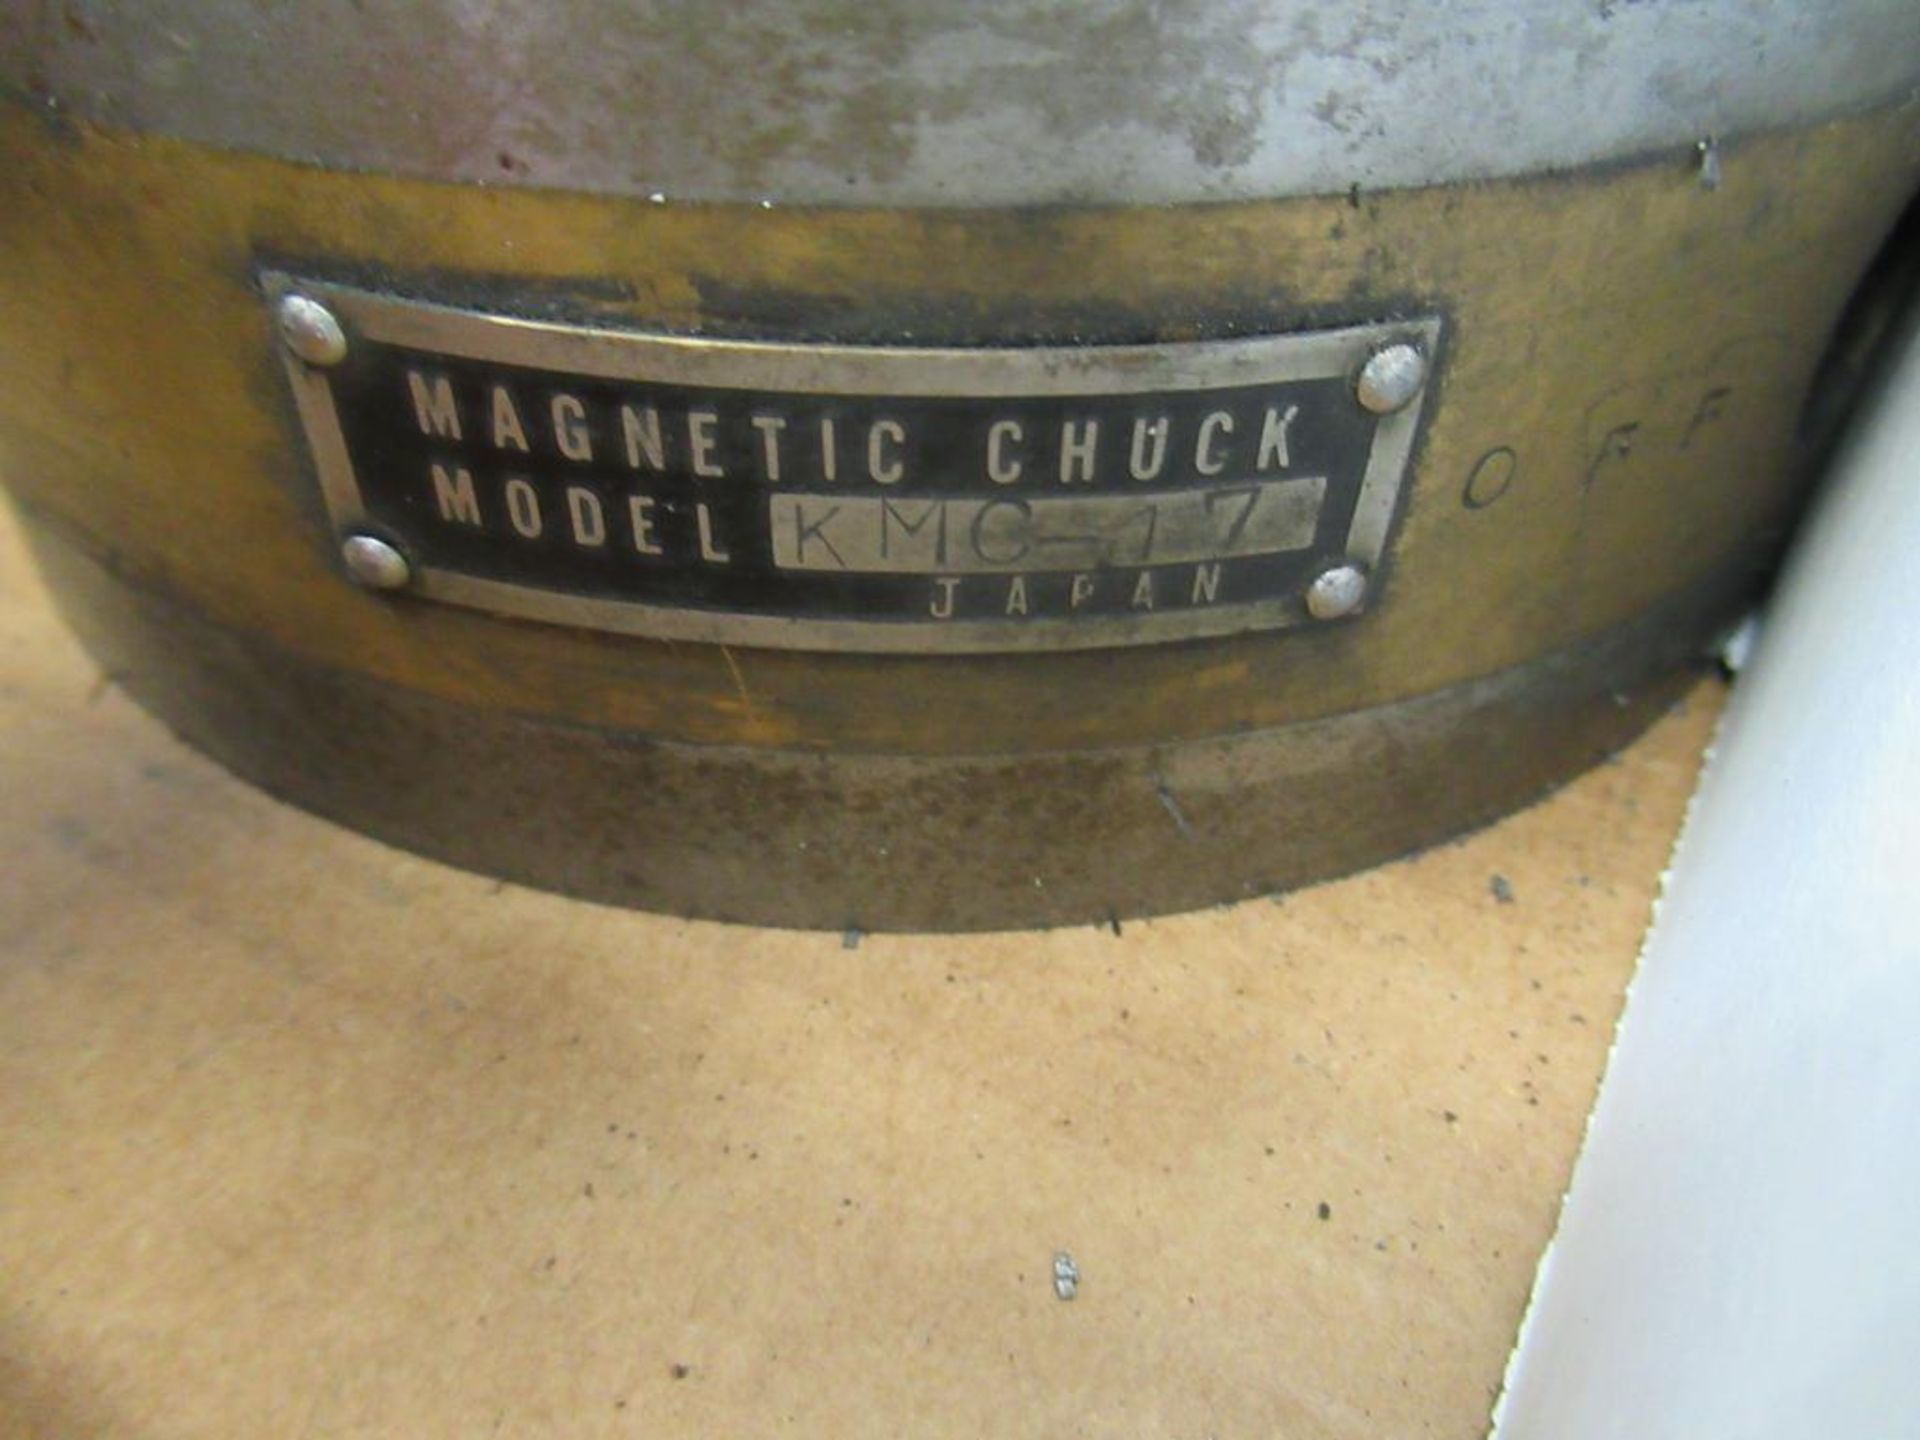 6" Round Magnetic Chuck & Magnetic Blocks - Image 2 of 2